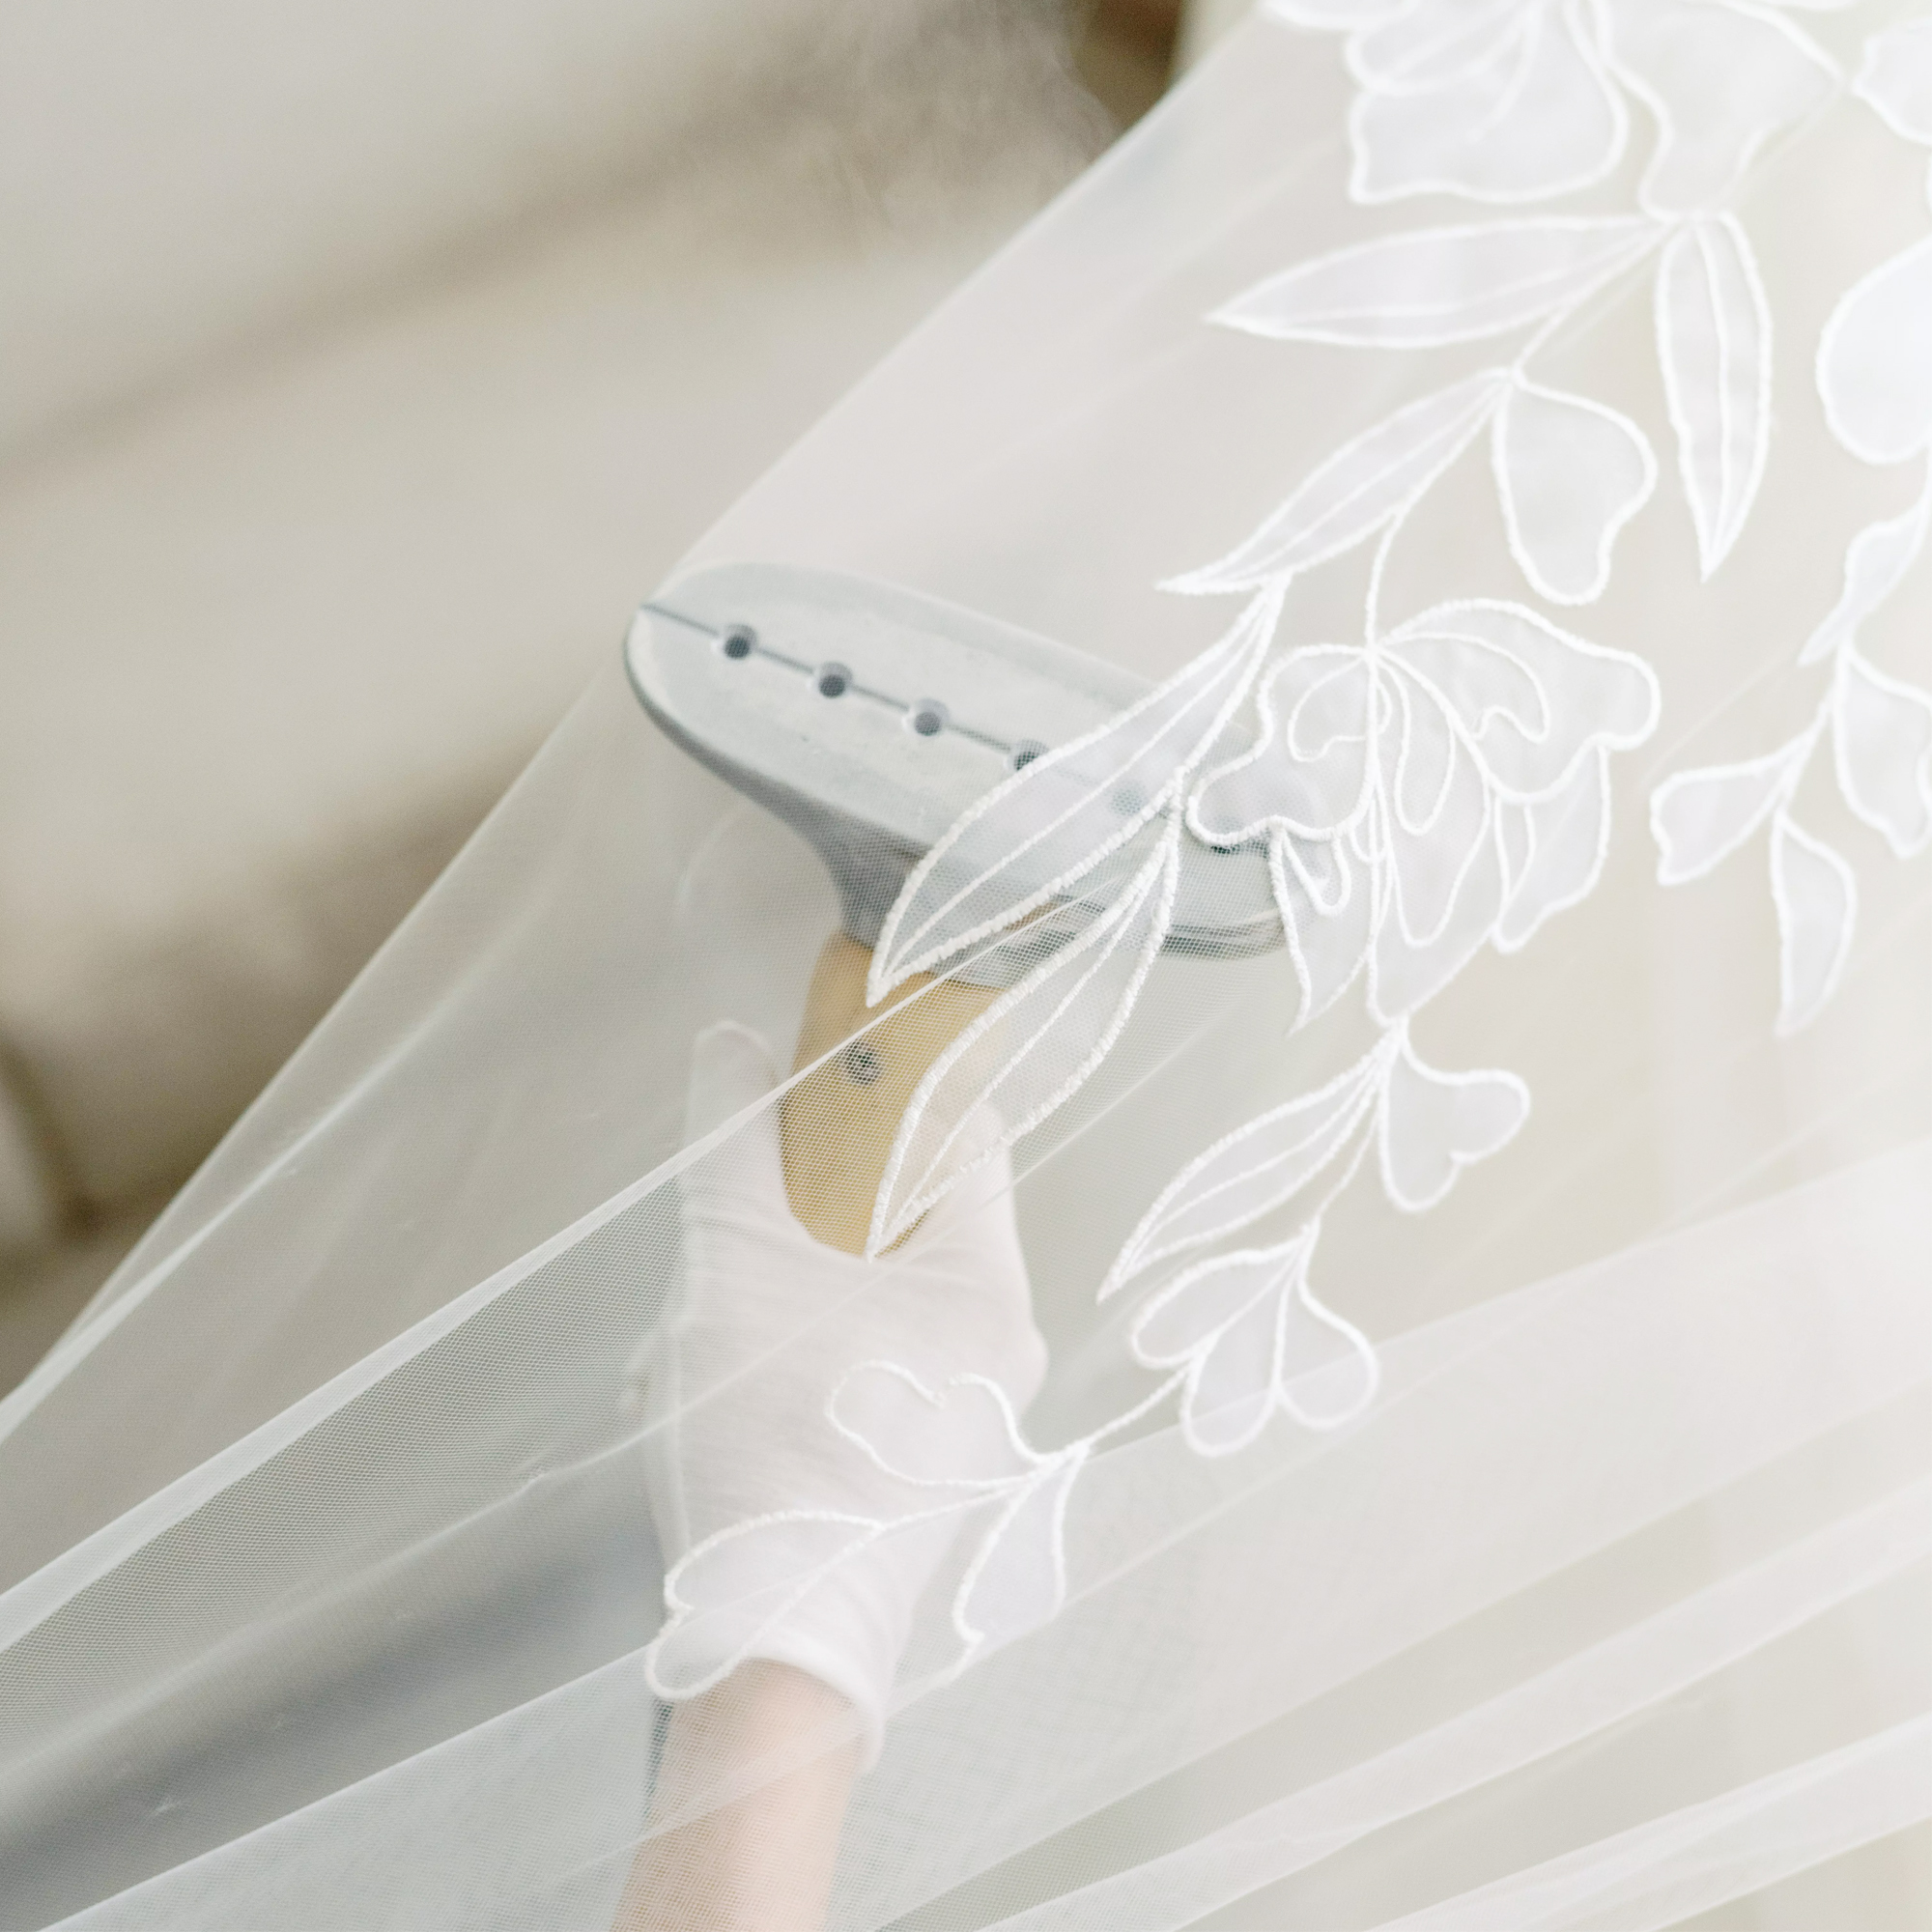 Expert Tips on What to Do When Your Wedding Dress is Wrinkled